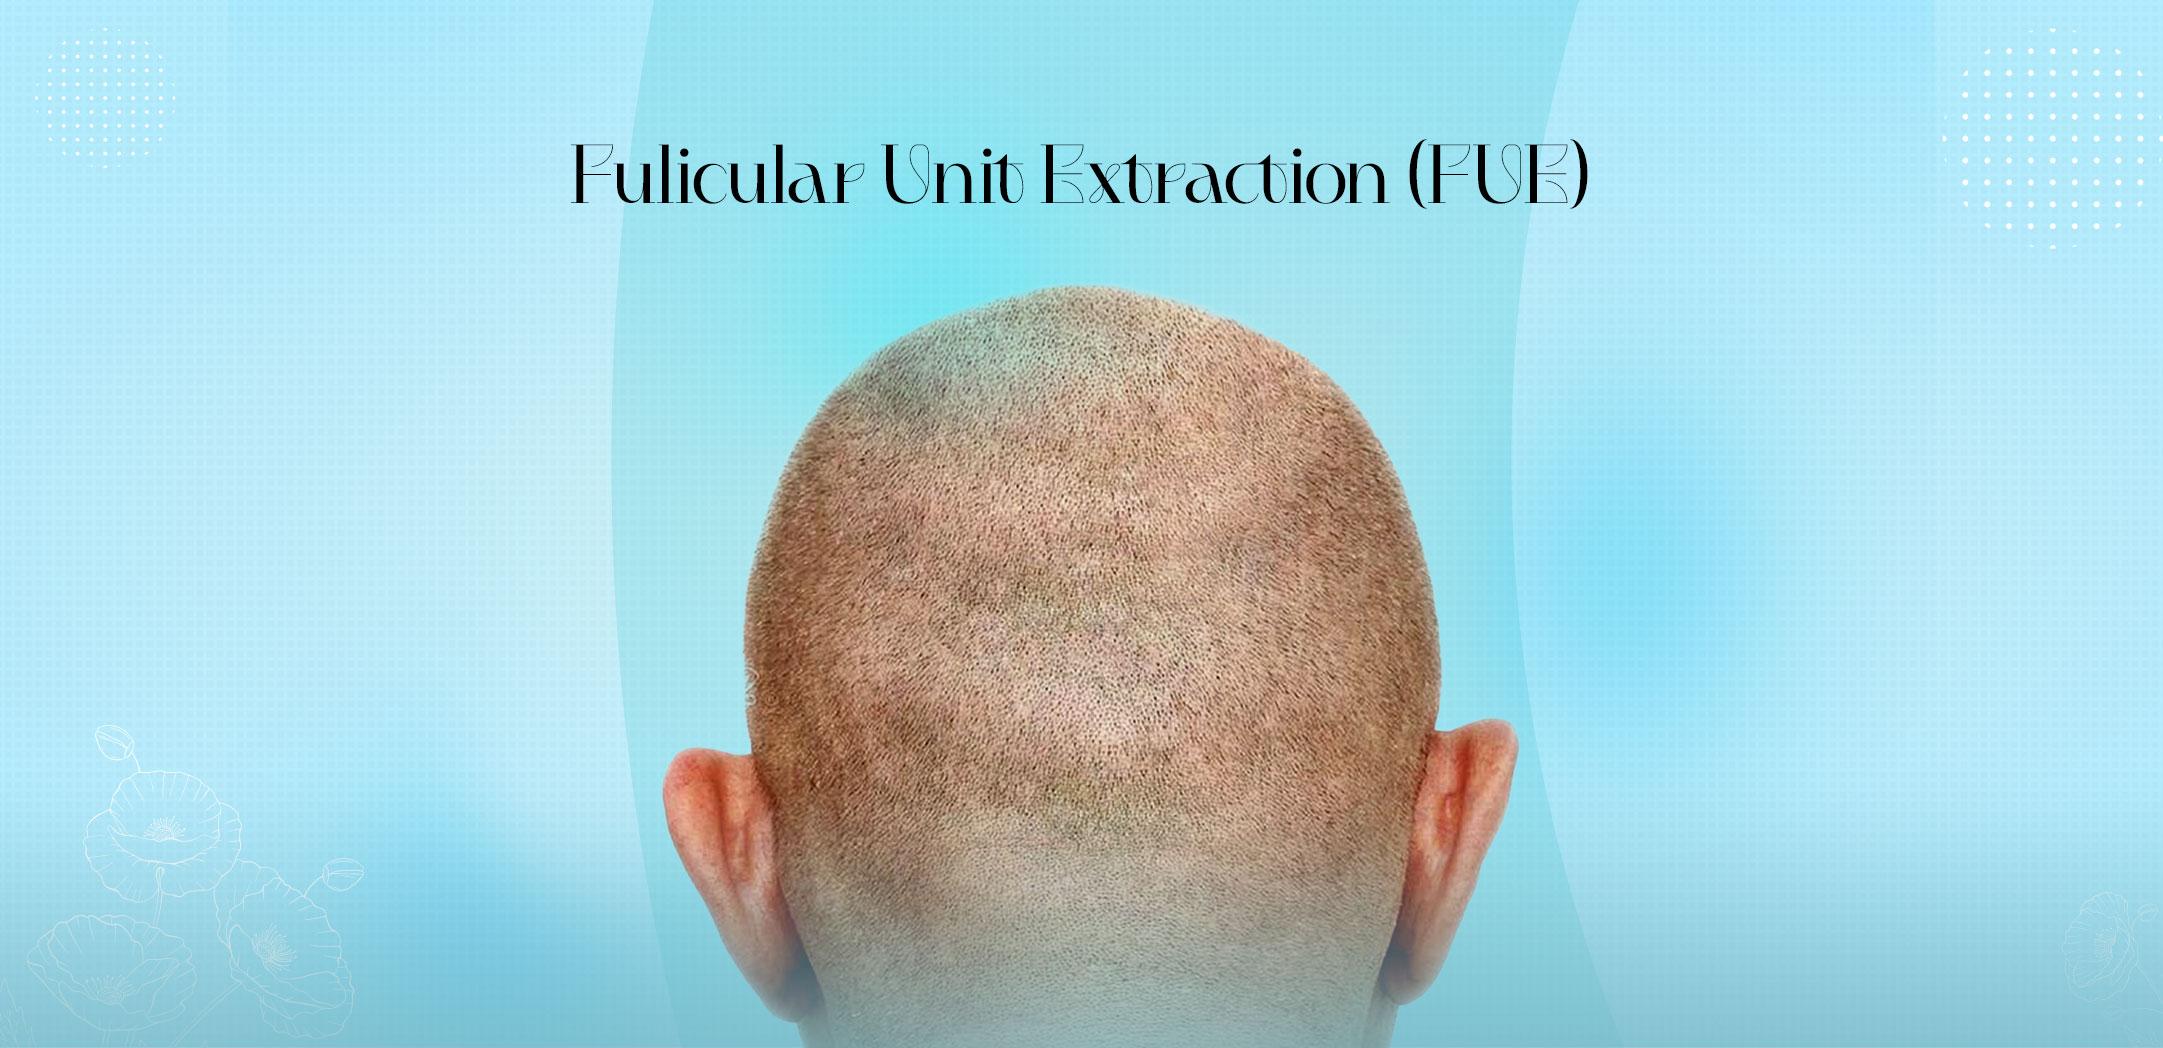 Fulicular Unit Extraction (FUE)